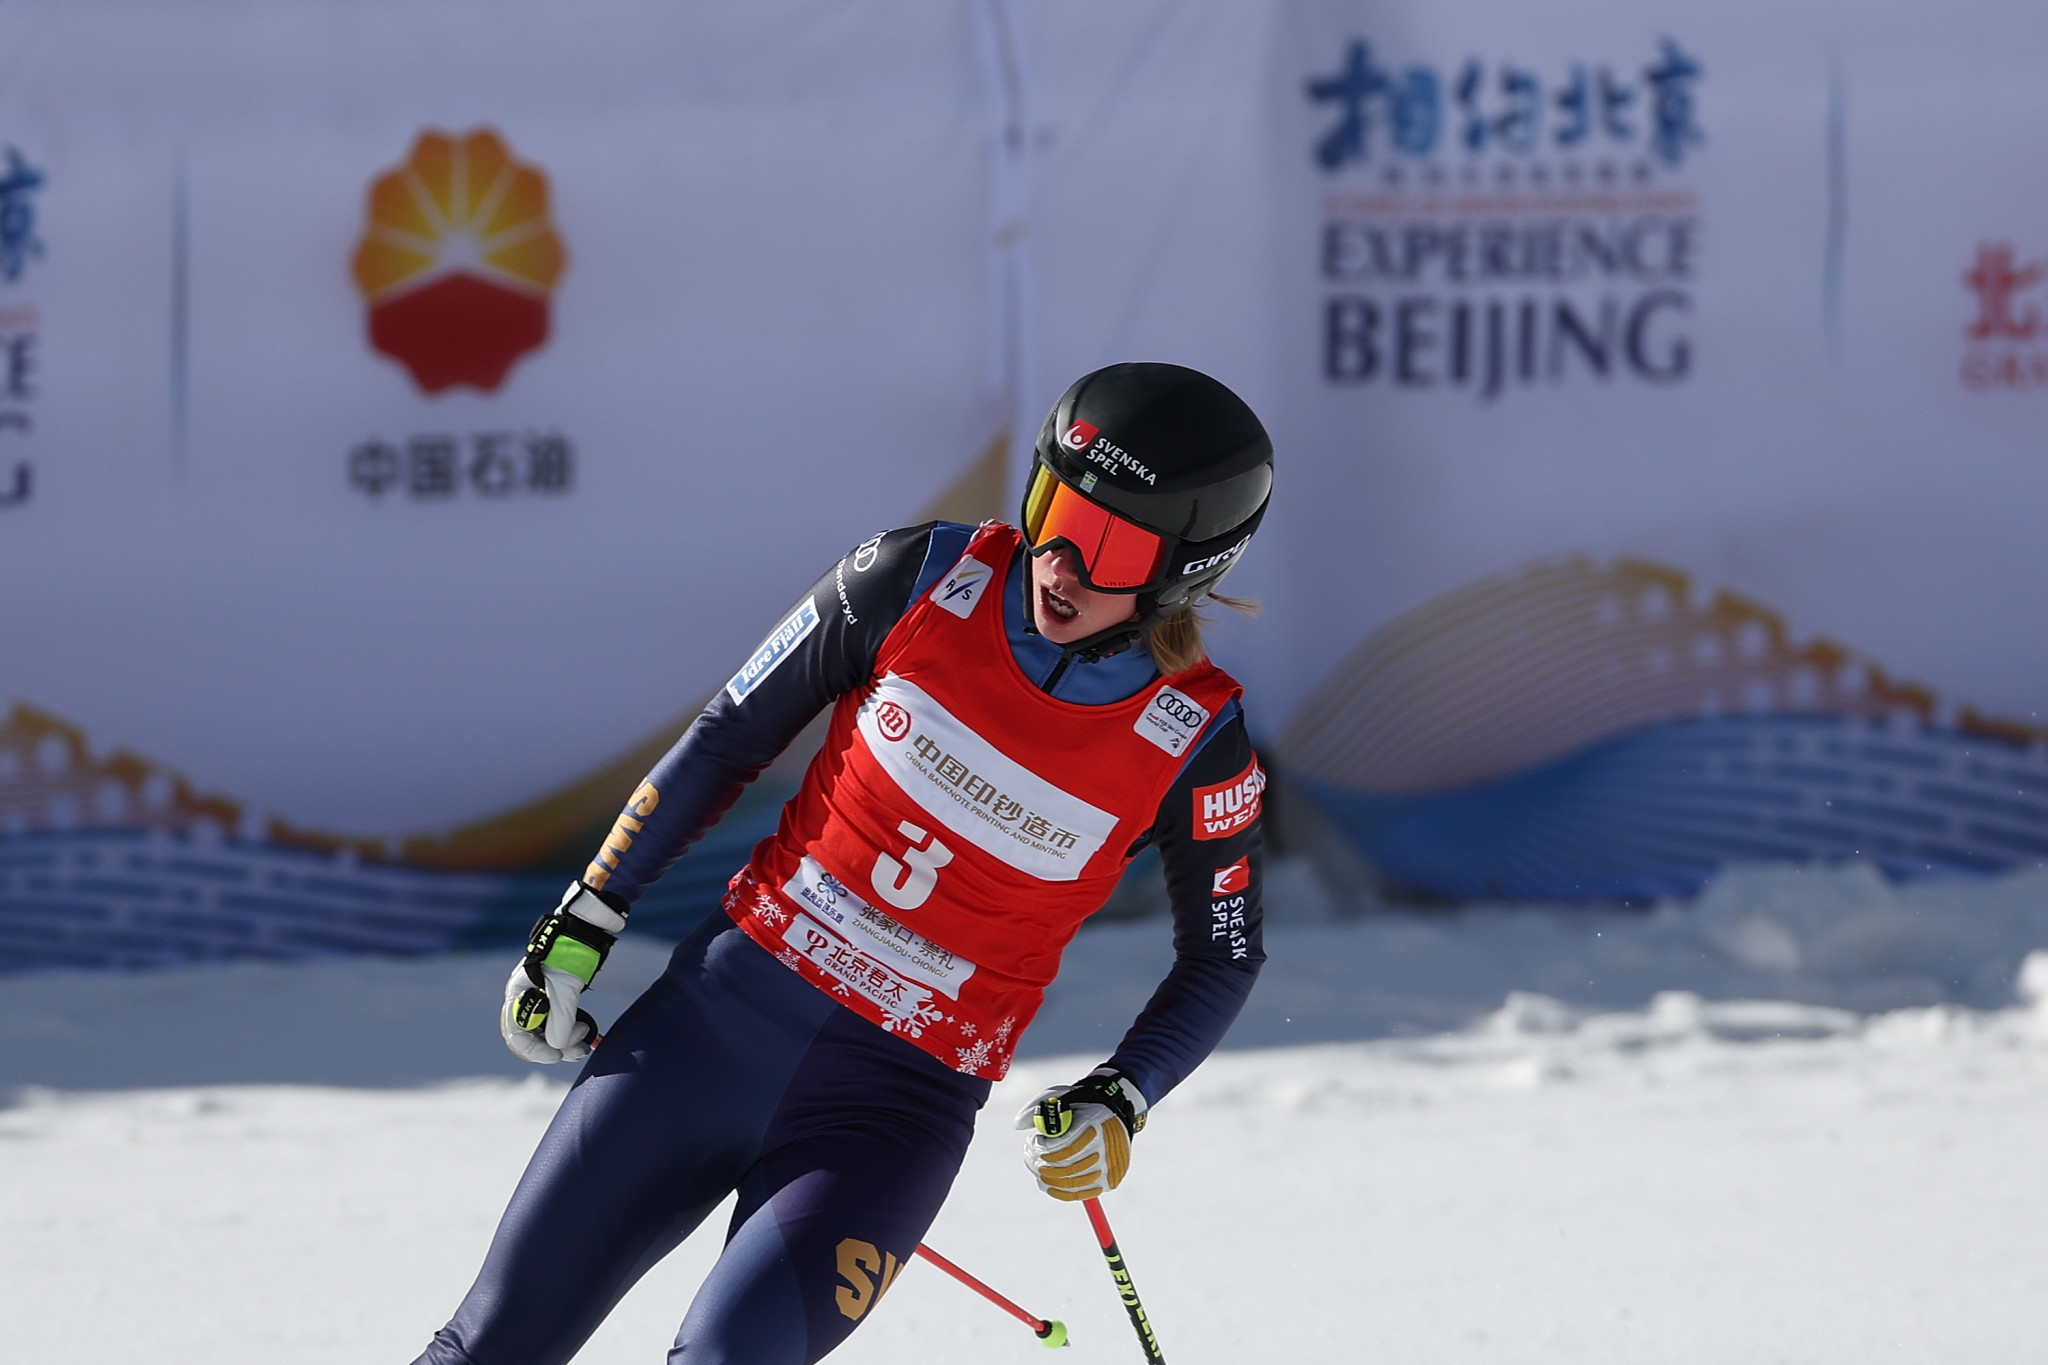 Näslund tops qualification at Ski Cross World Cup opener on Beijing 2022 course